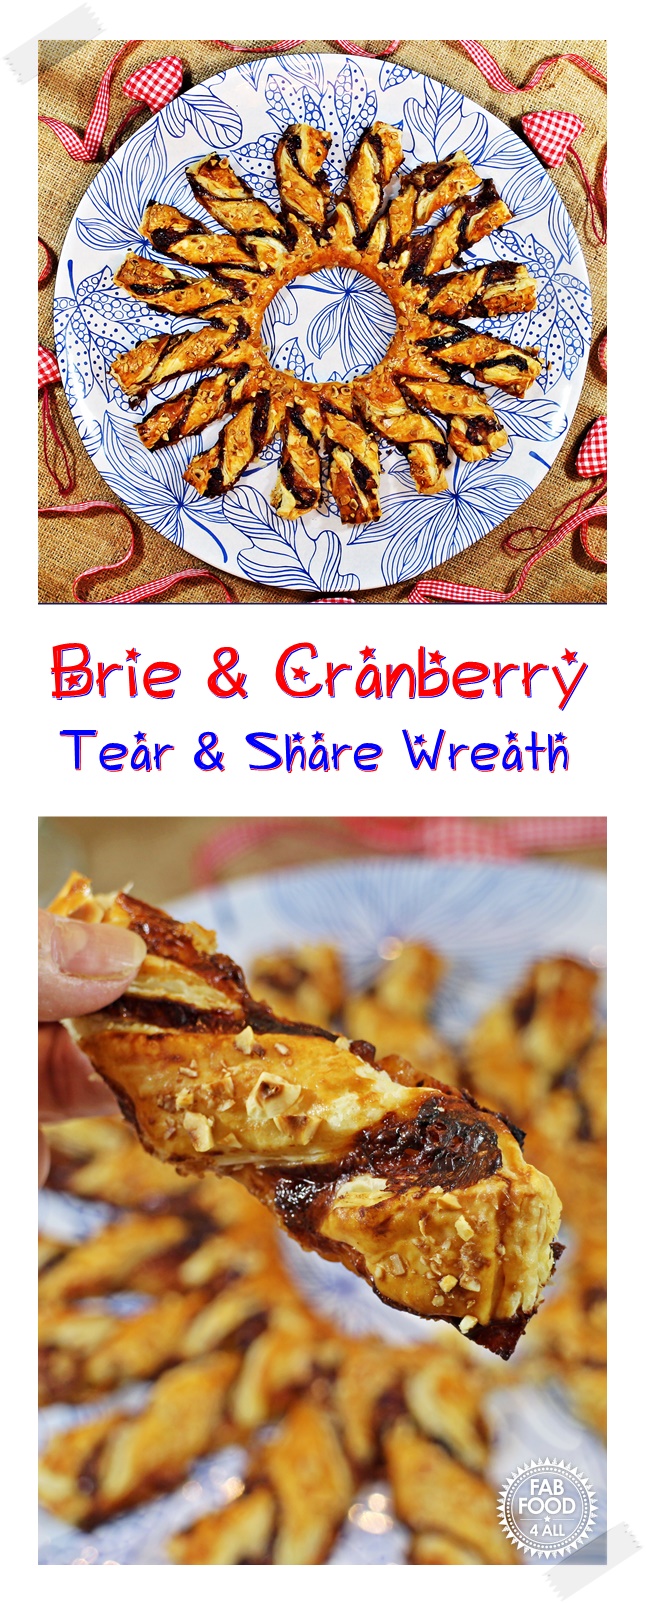 Brie & Cranberry Tear & Share Wreath - Fab Food 4 All #Brie #Cranberry #Christmas #Buffet #PuffPastry #CheeseStraws